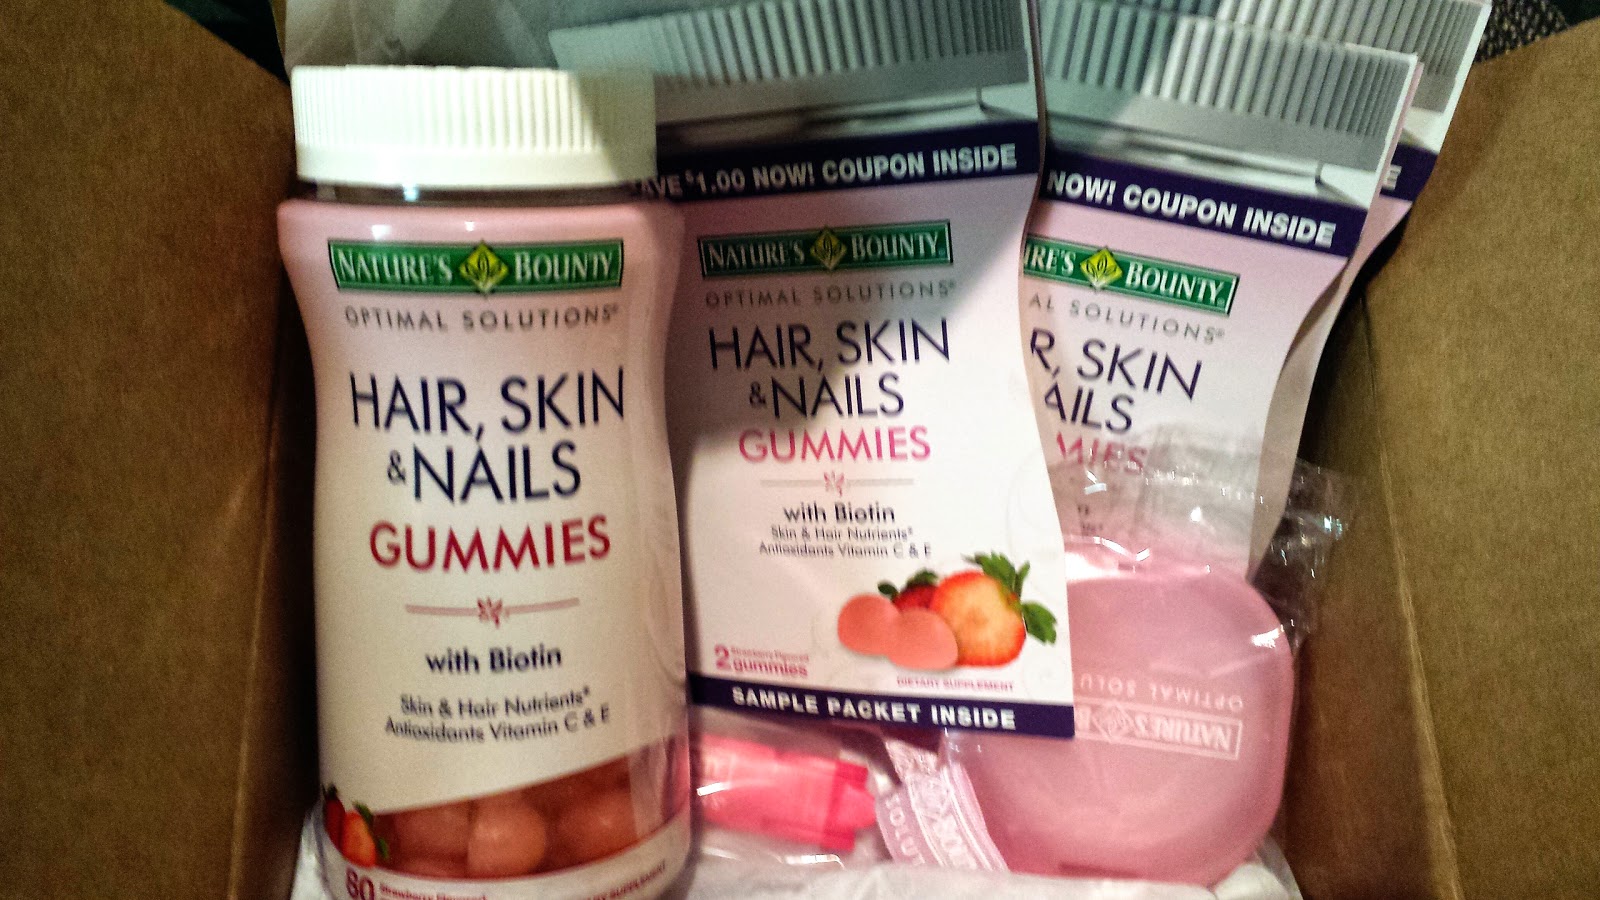 Nature's Bounty Hair, Skin & Nails Gummies with Biotin Review